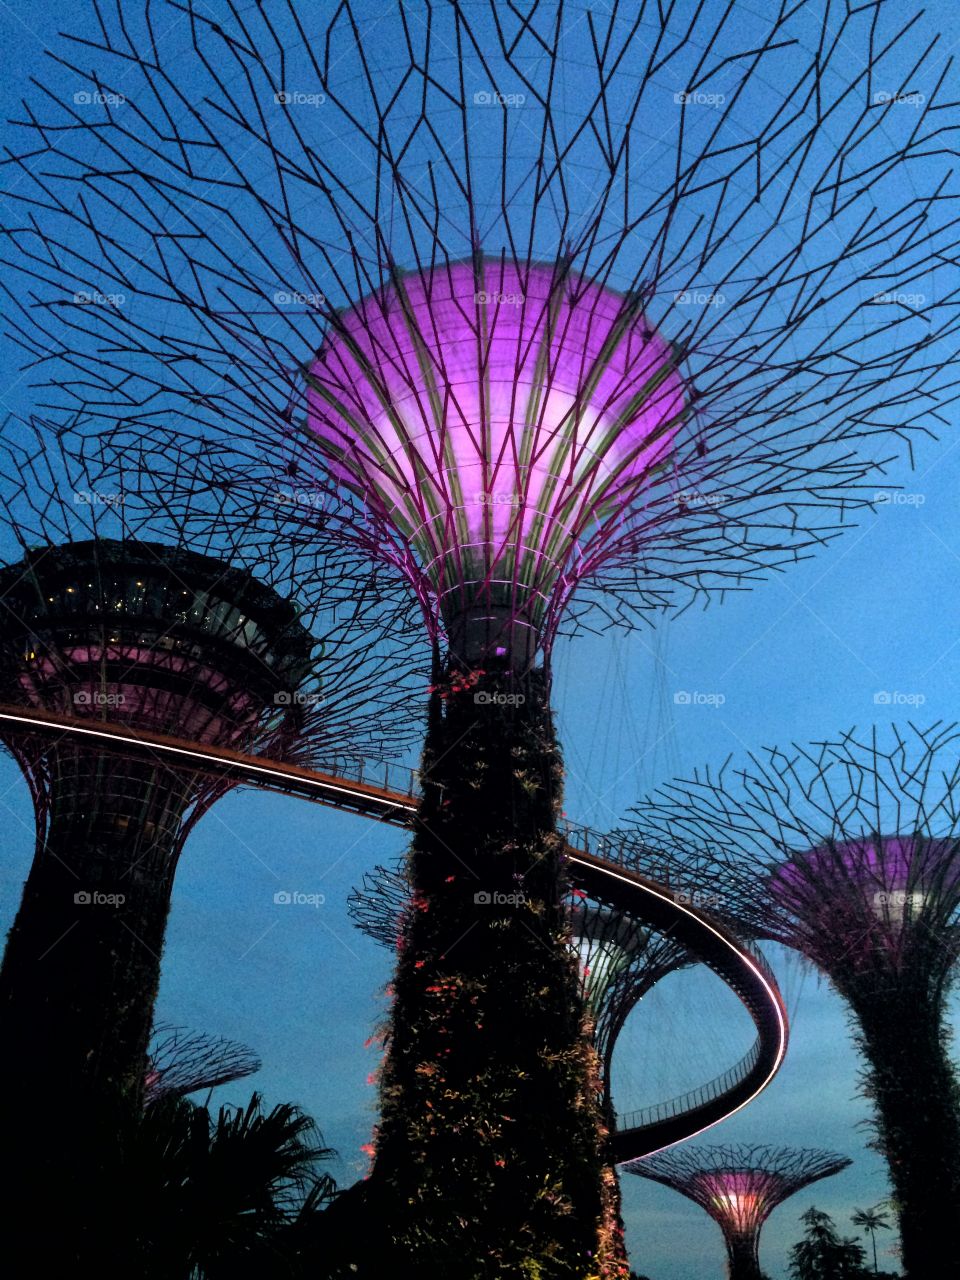 Giant trees at night in Singapore